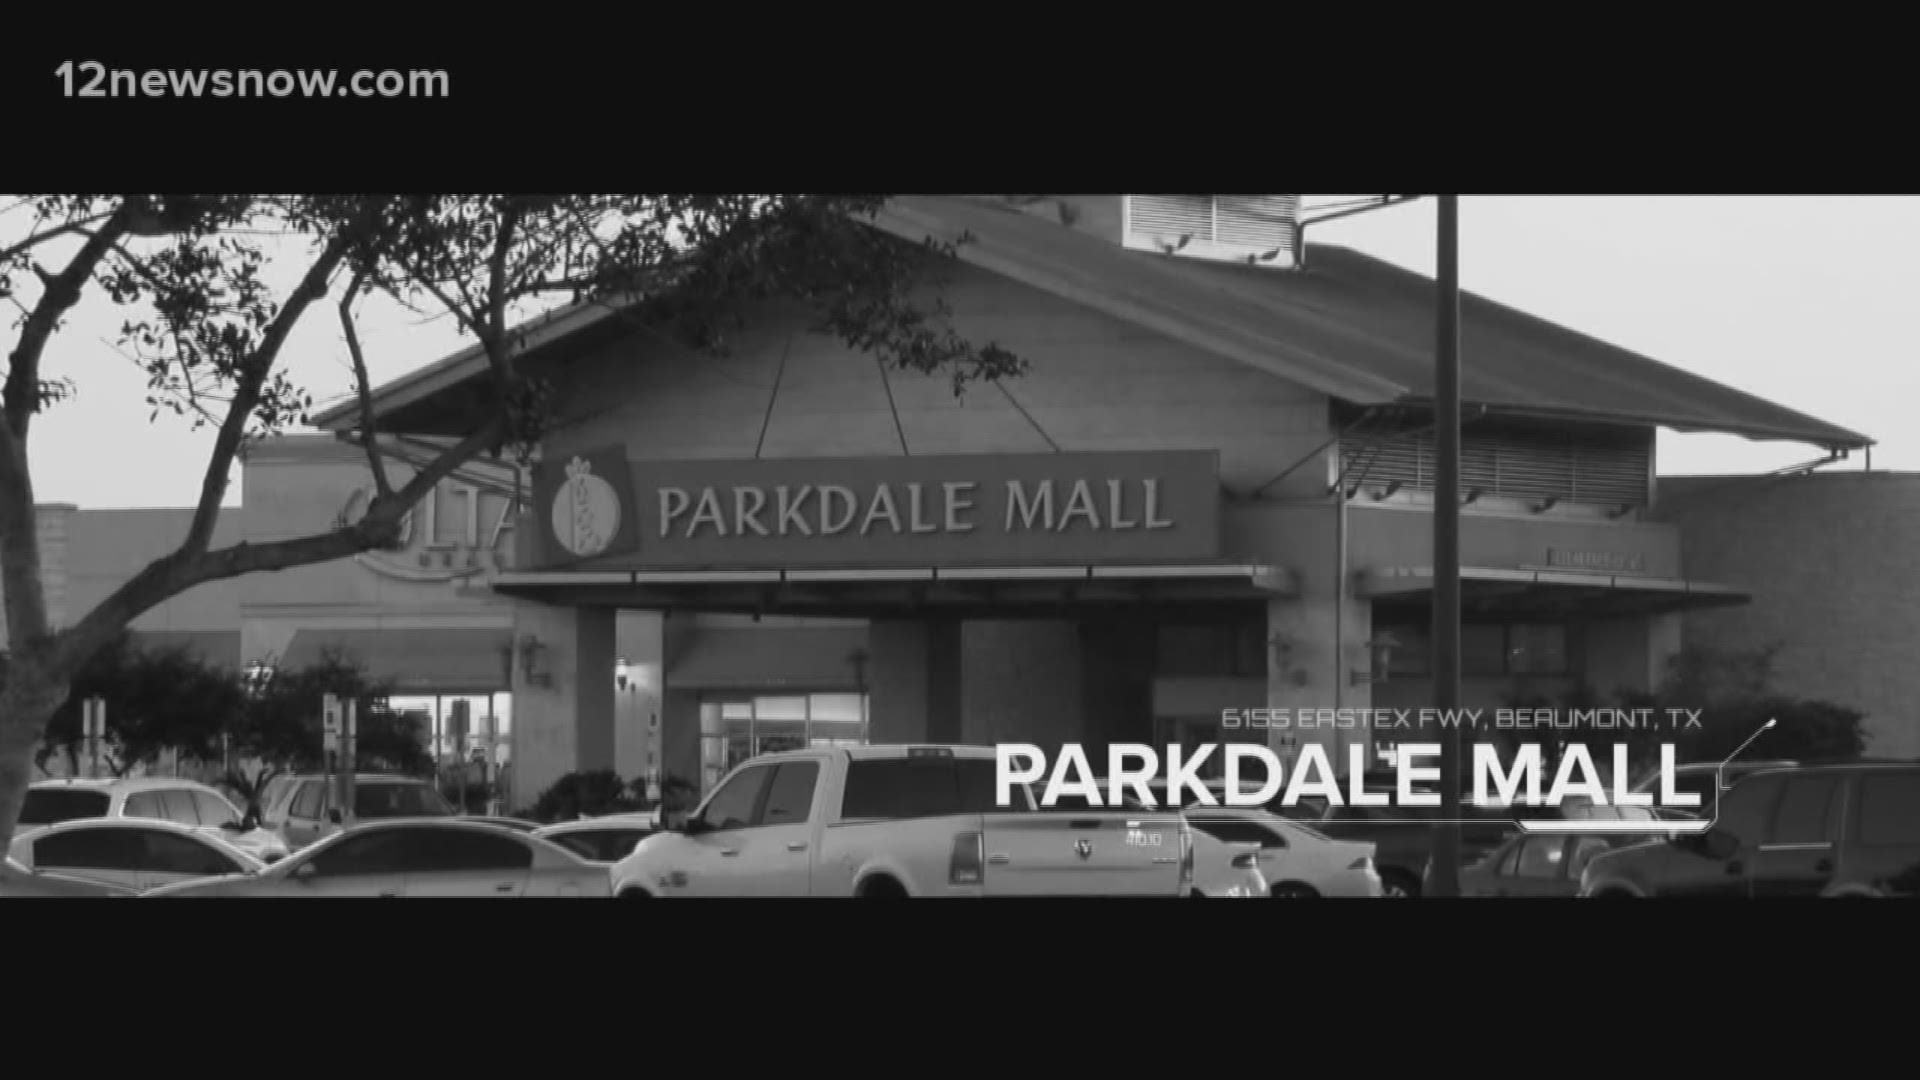 Parkdale Mall had the most calls for service.